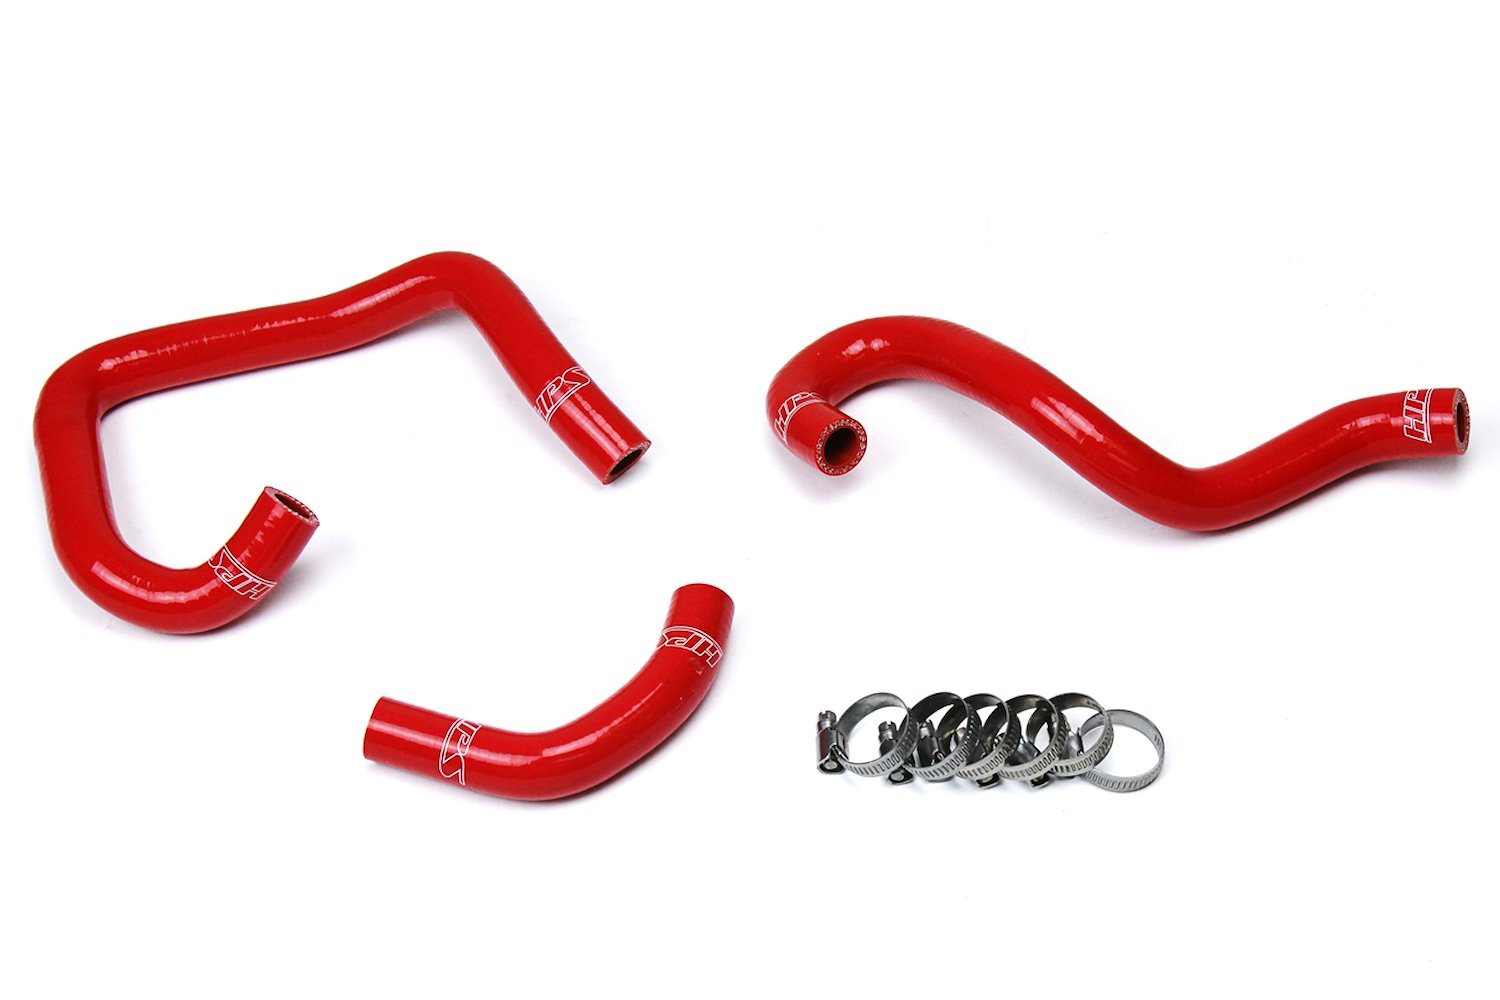 57-1521-RED Heater Hose Kit, High-Temp 3-Ply Reinforced Silicone, Replace OEM Rubber Heater Coolant Hoses